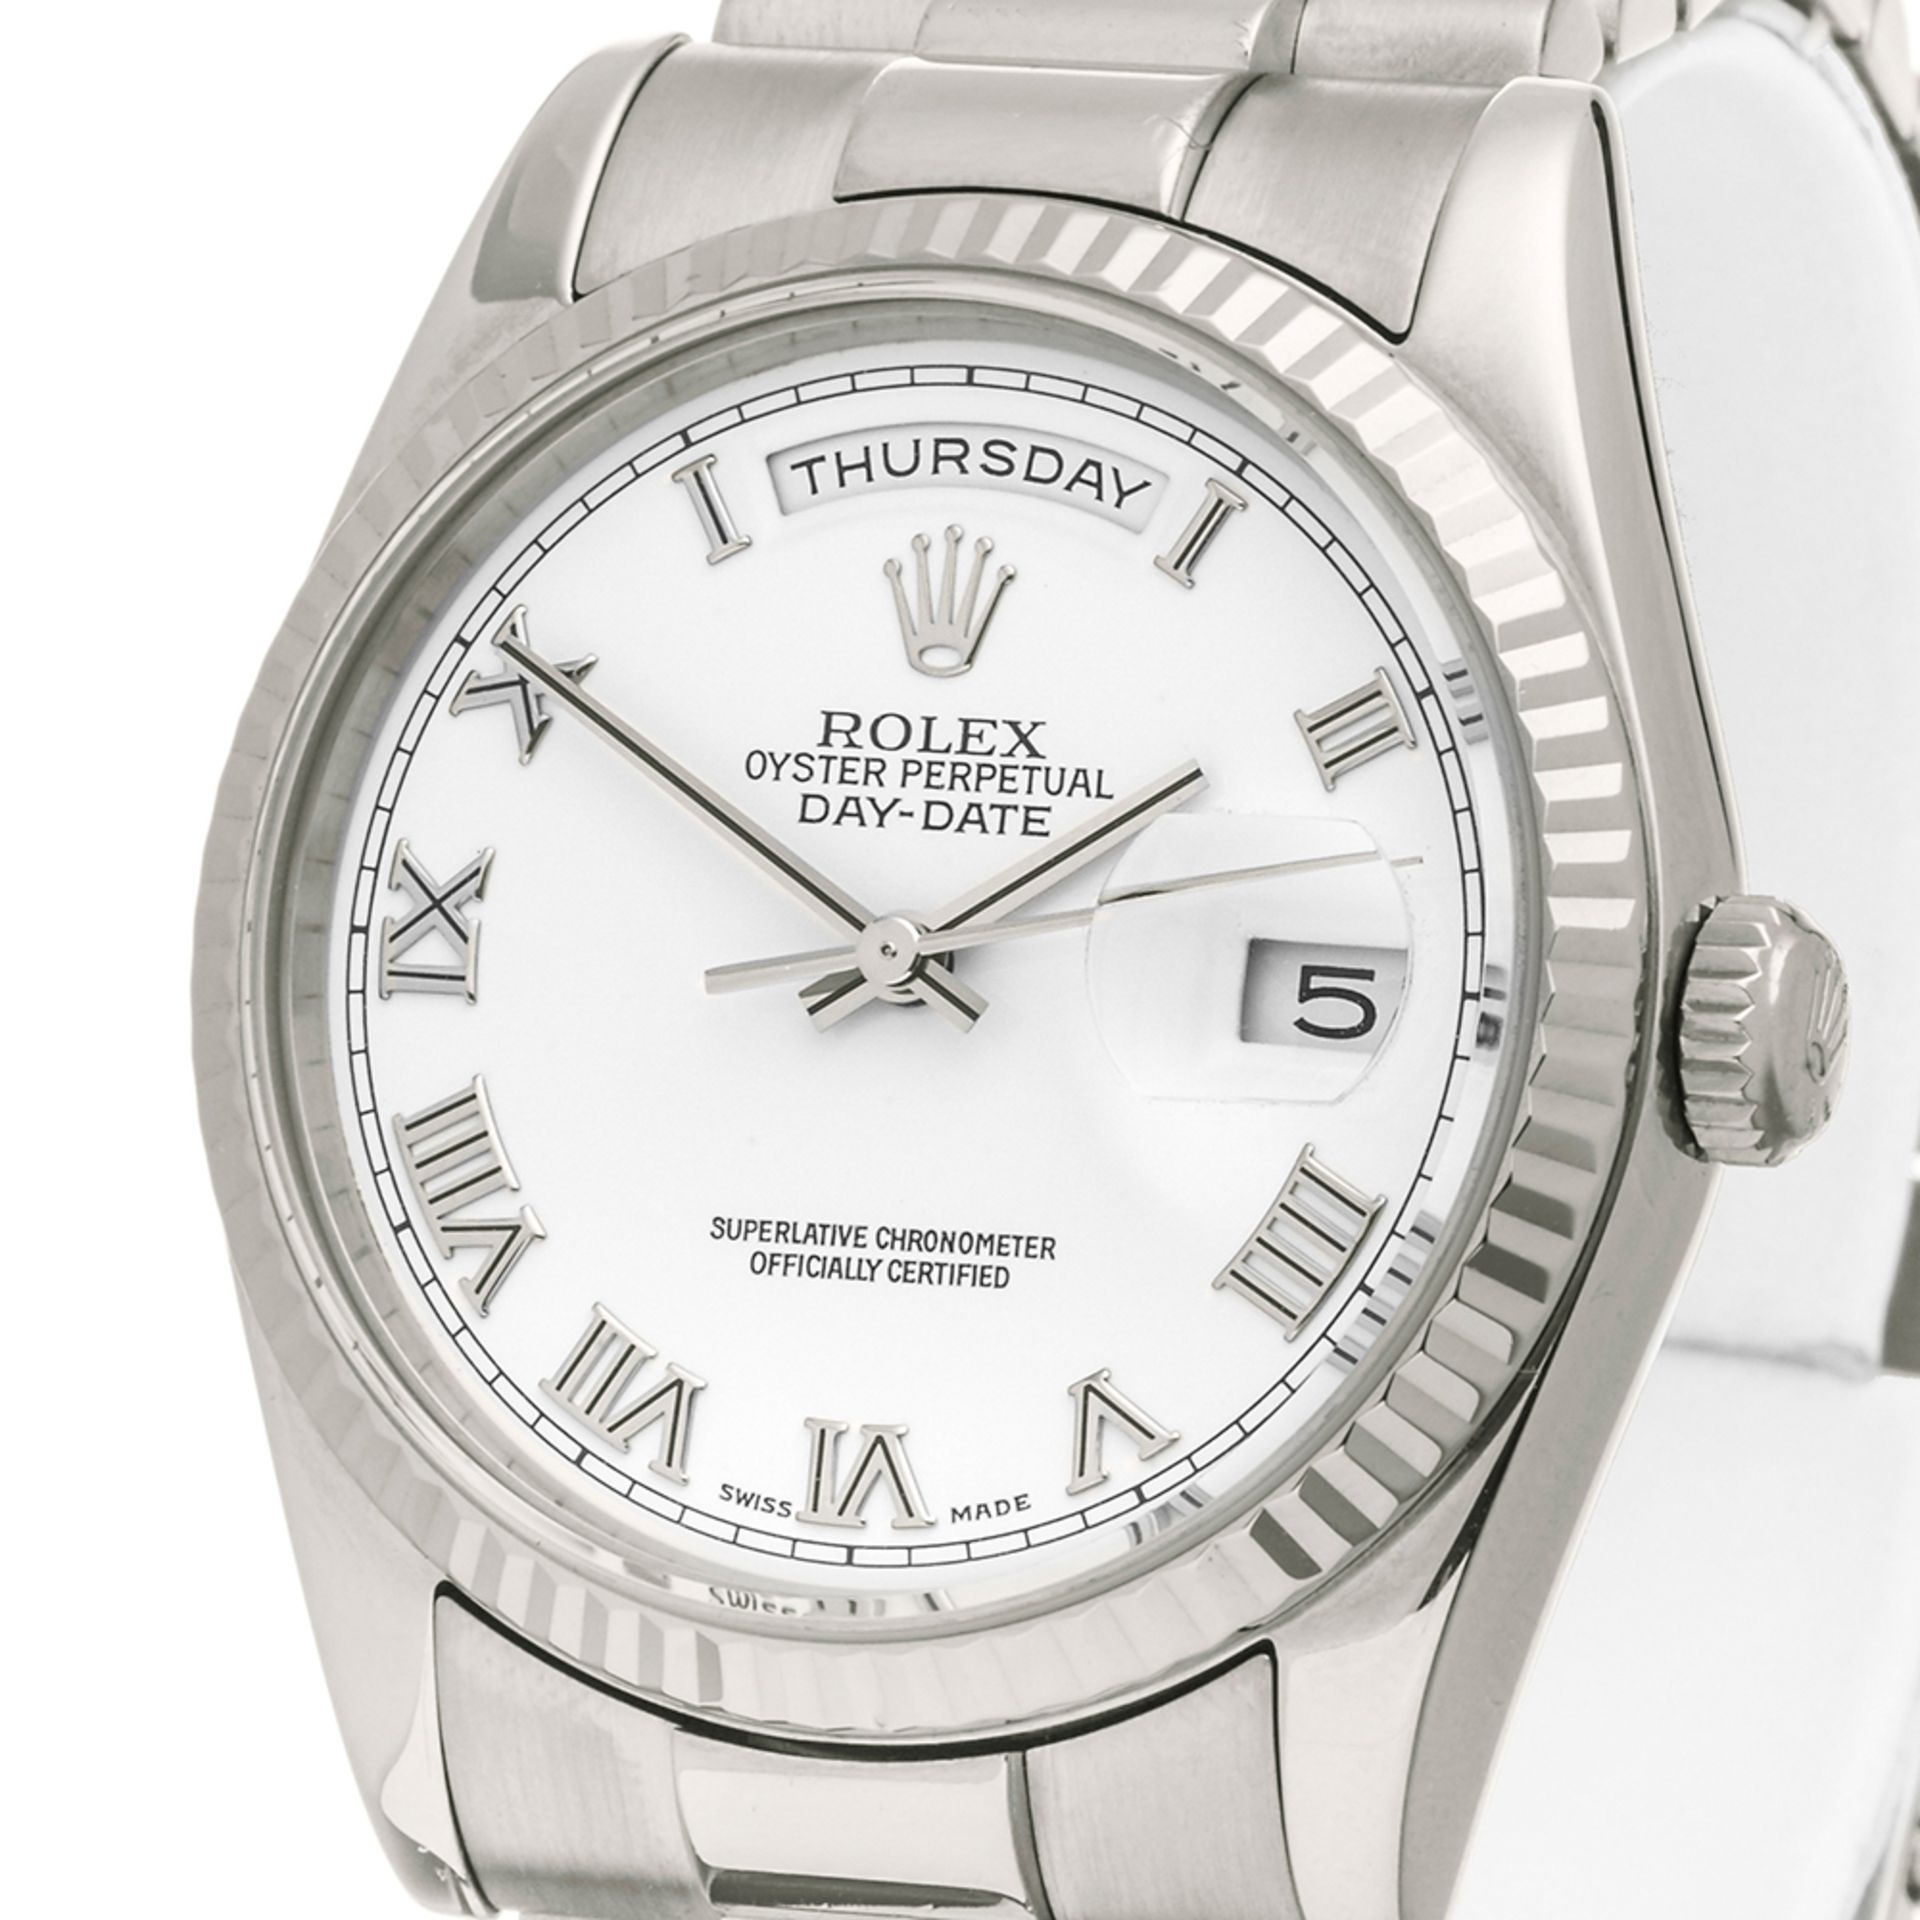 Rolex Day-Date 36mm 18k White Gold - 118239 - Image 3 of 7